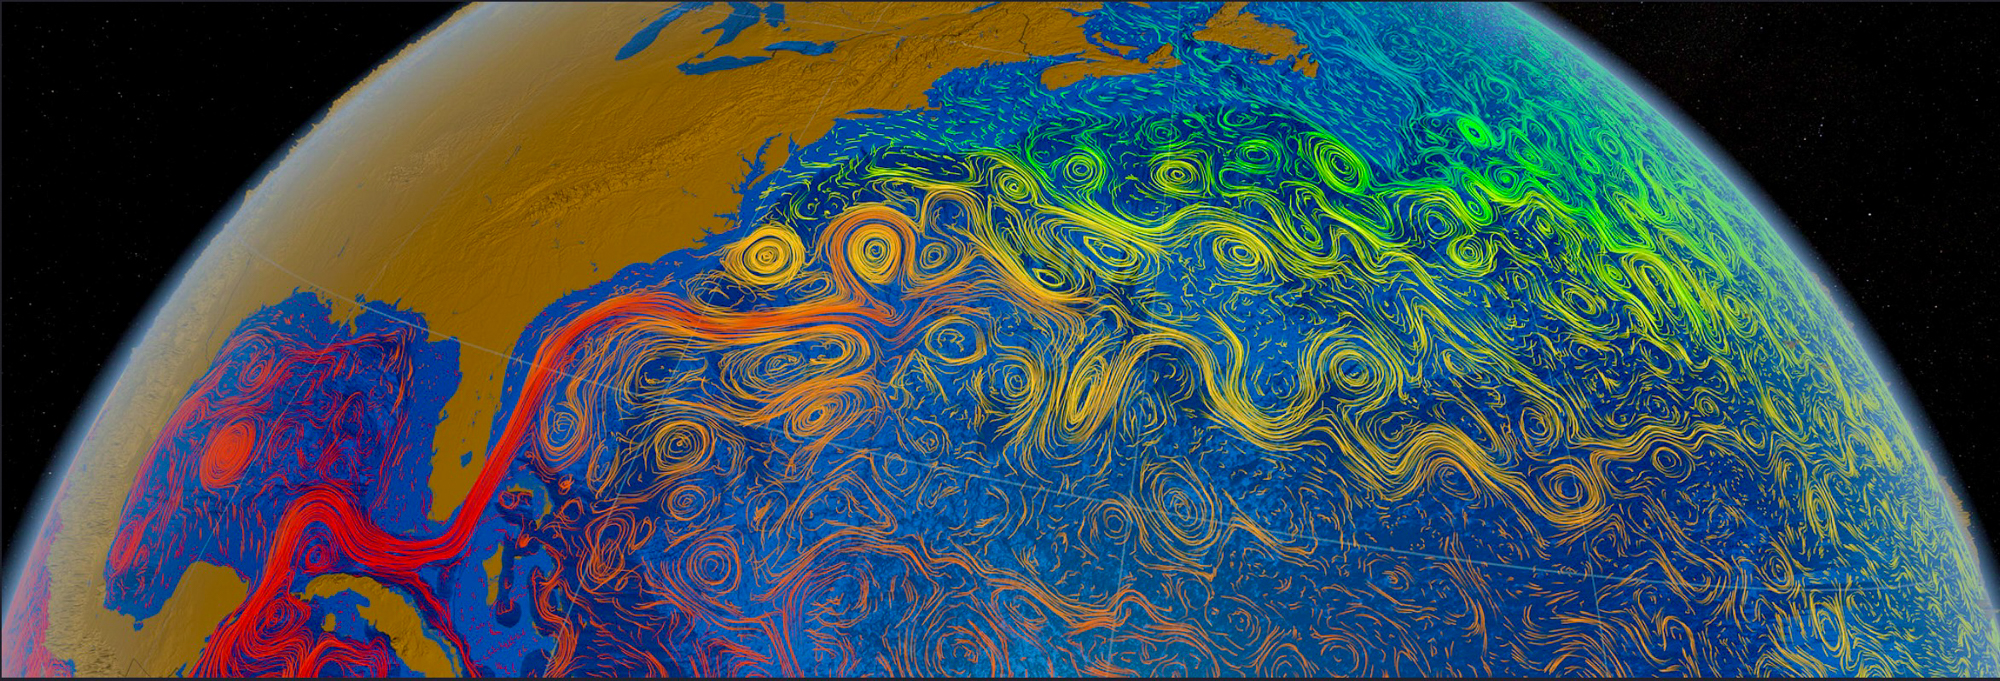 A NASA generated visual showing water currents as they move across the globe.